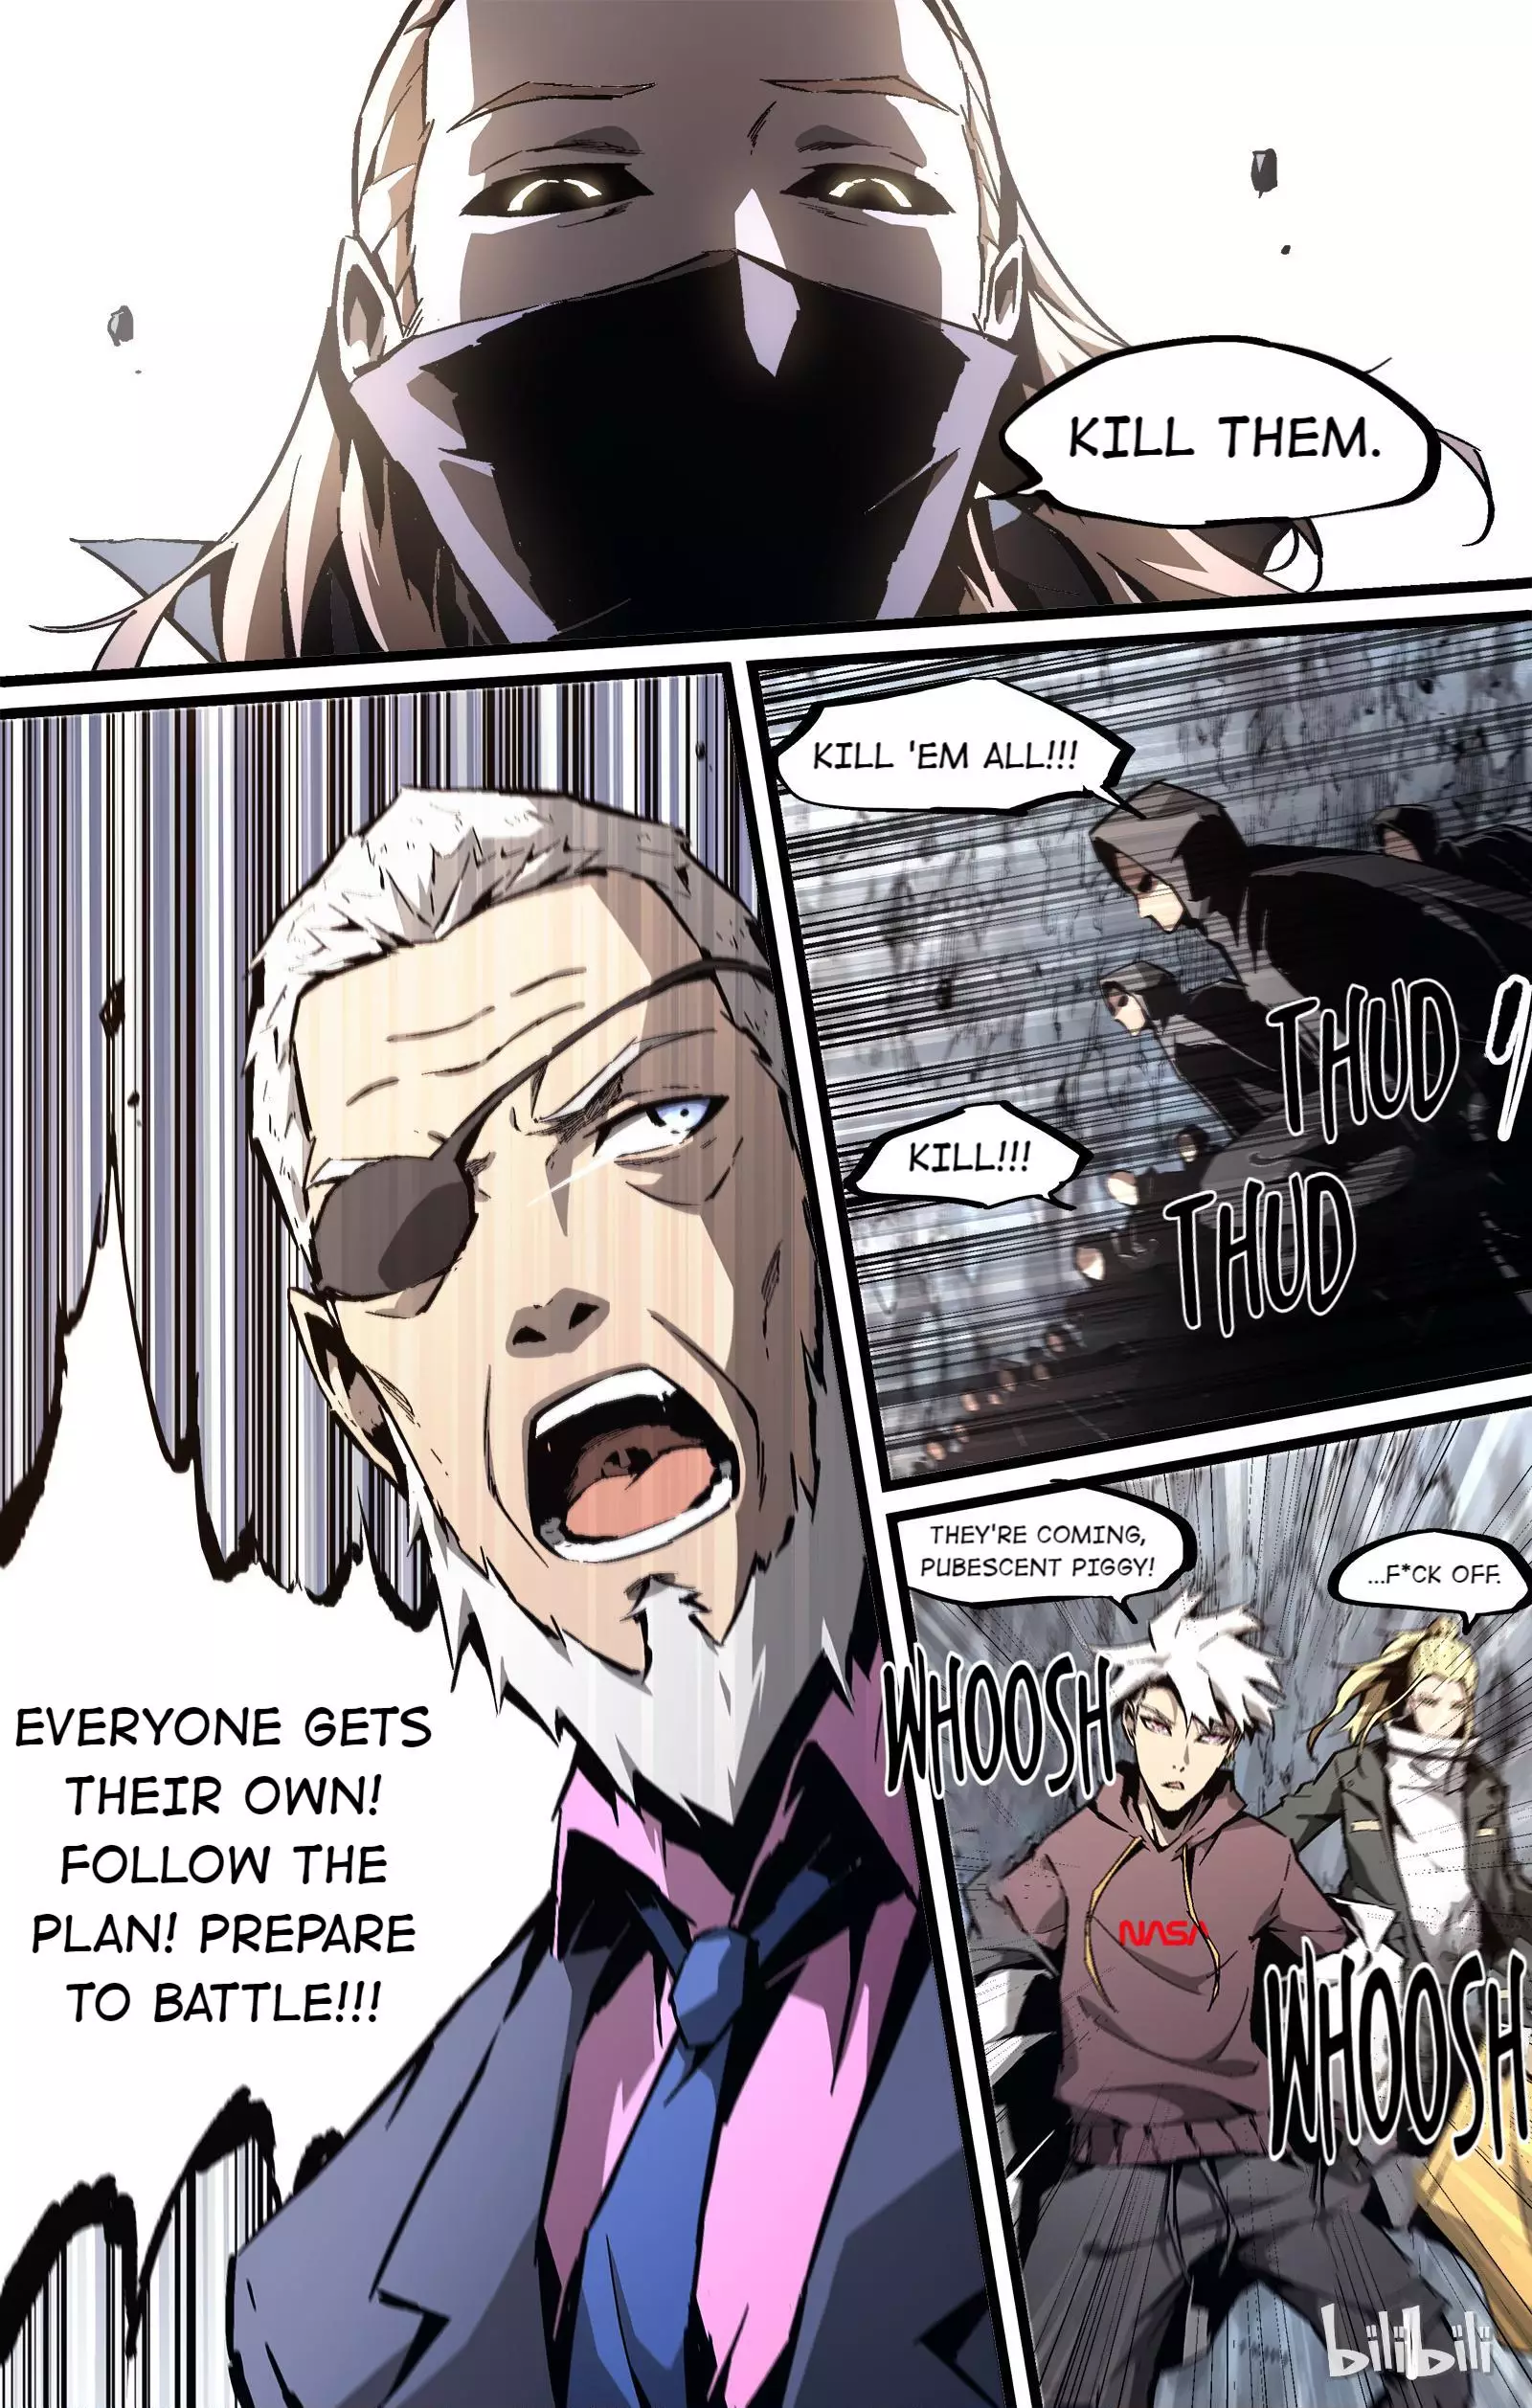 Outlaws - 91 page 1-00f00b9d